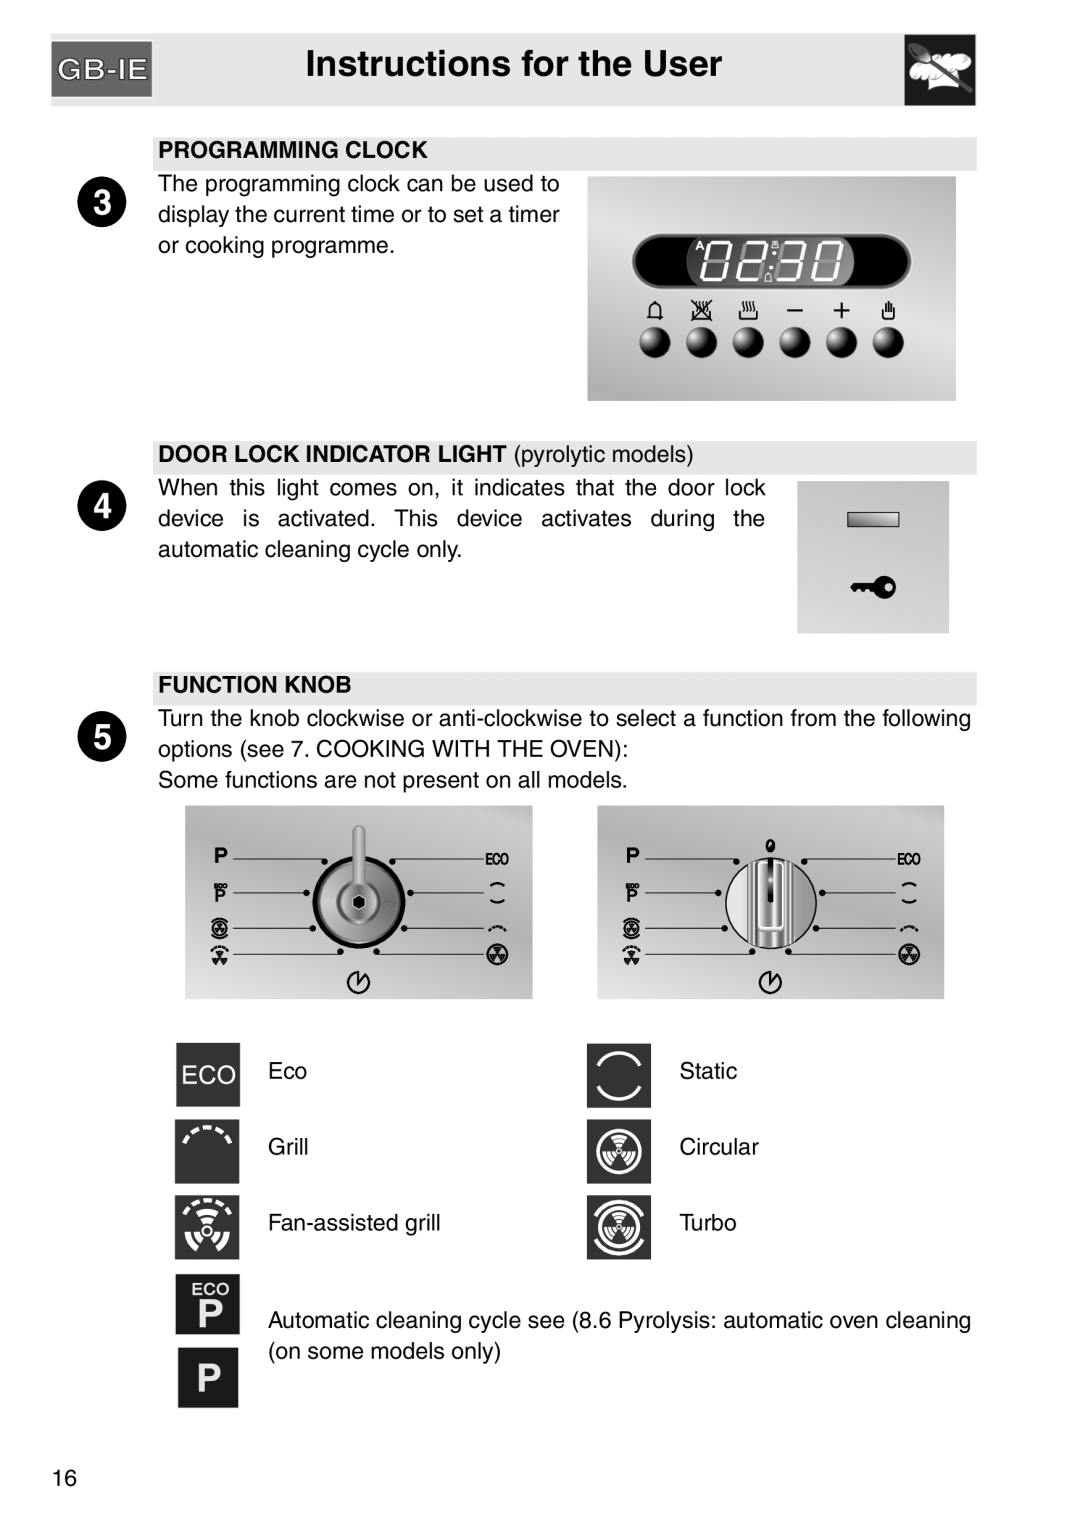 Smeg SAP306X-9, electric oven installation instructions Instructions for the User, Programming Clock, Function Knob 